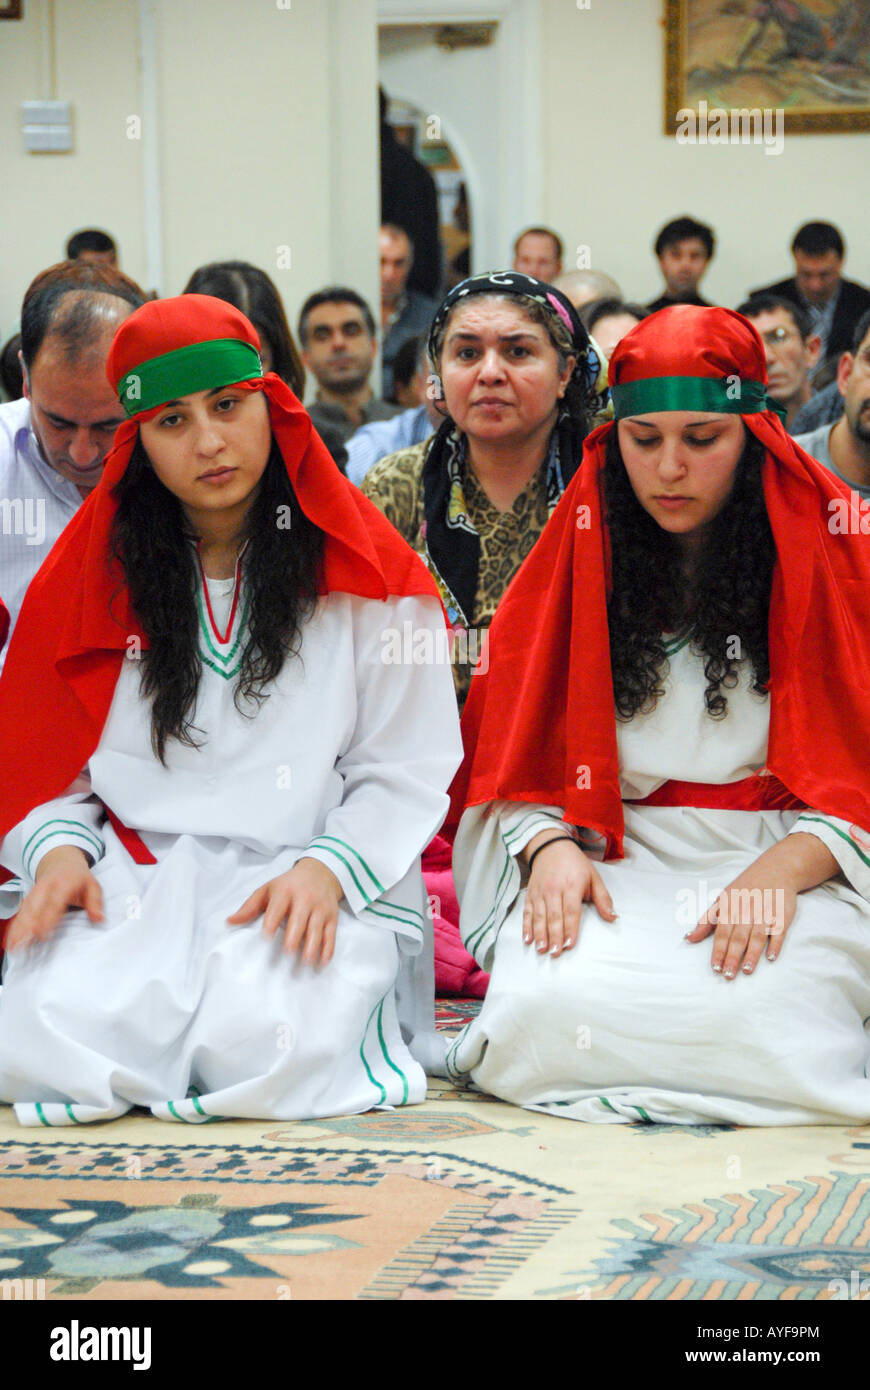 TWO YOUNG ALEVI FEMALE DURING RELIGIOUS CEREMONY,IN ALEVIS CULTURAL CENTER Stock Photo